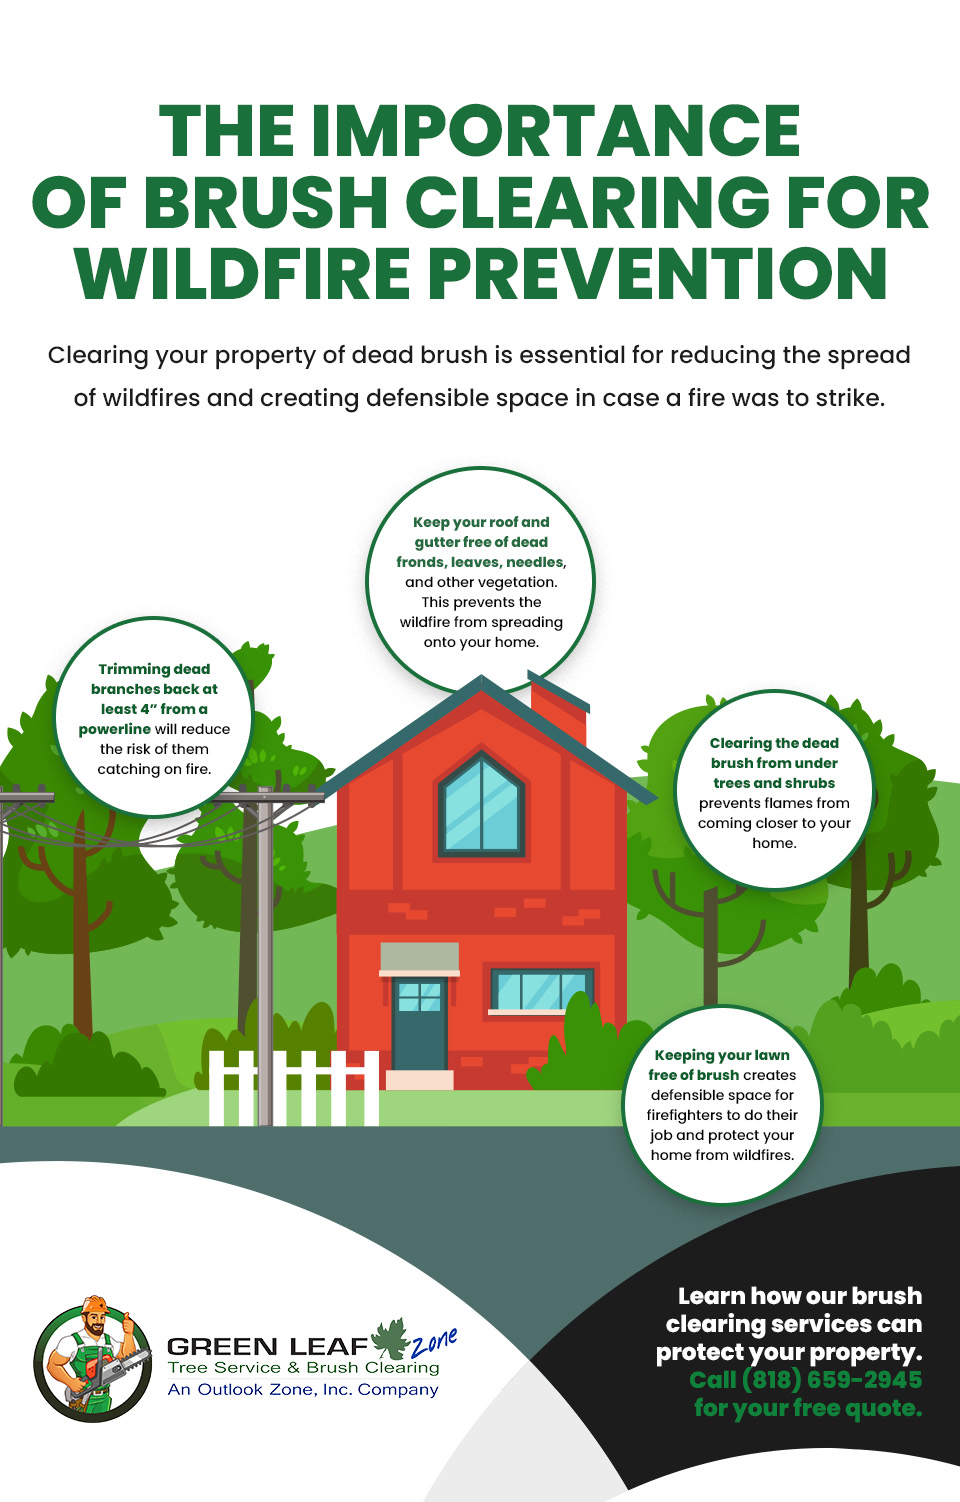 Brush Clearing for Wildfire Prevention Infographic